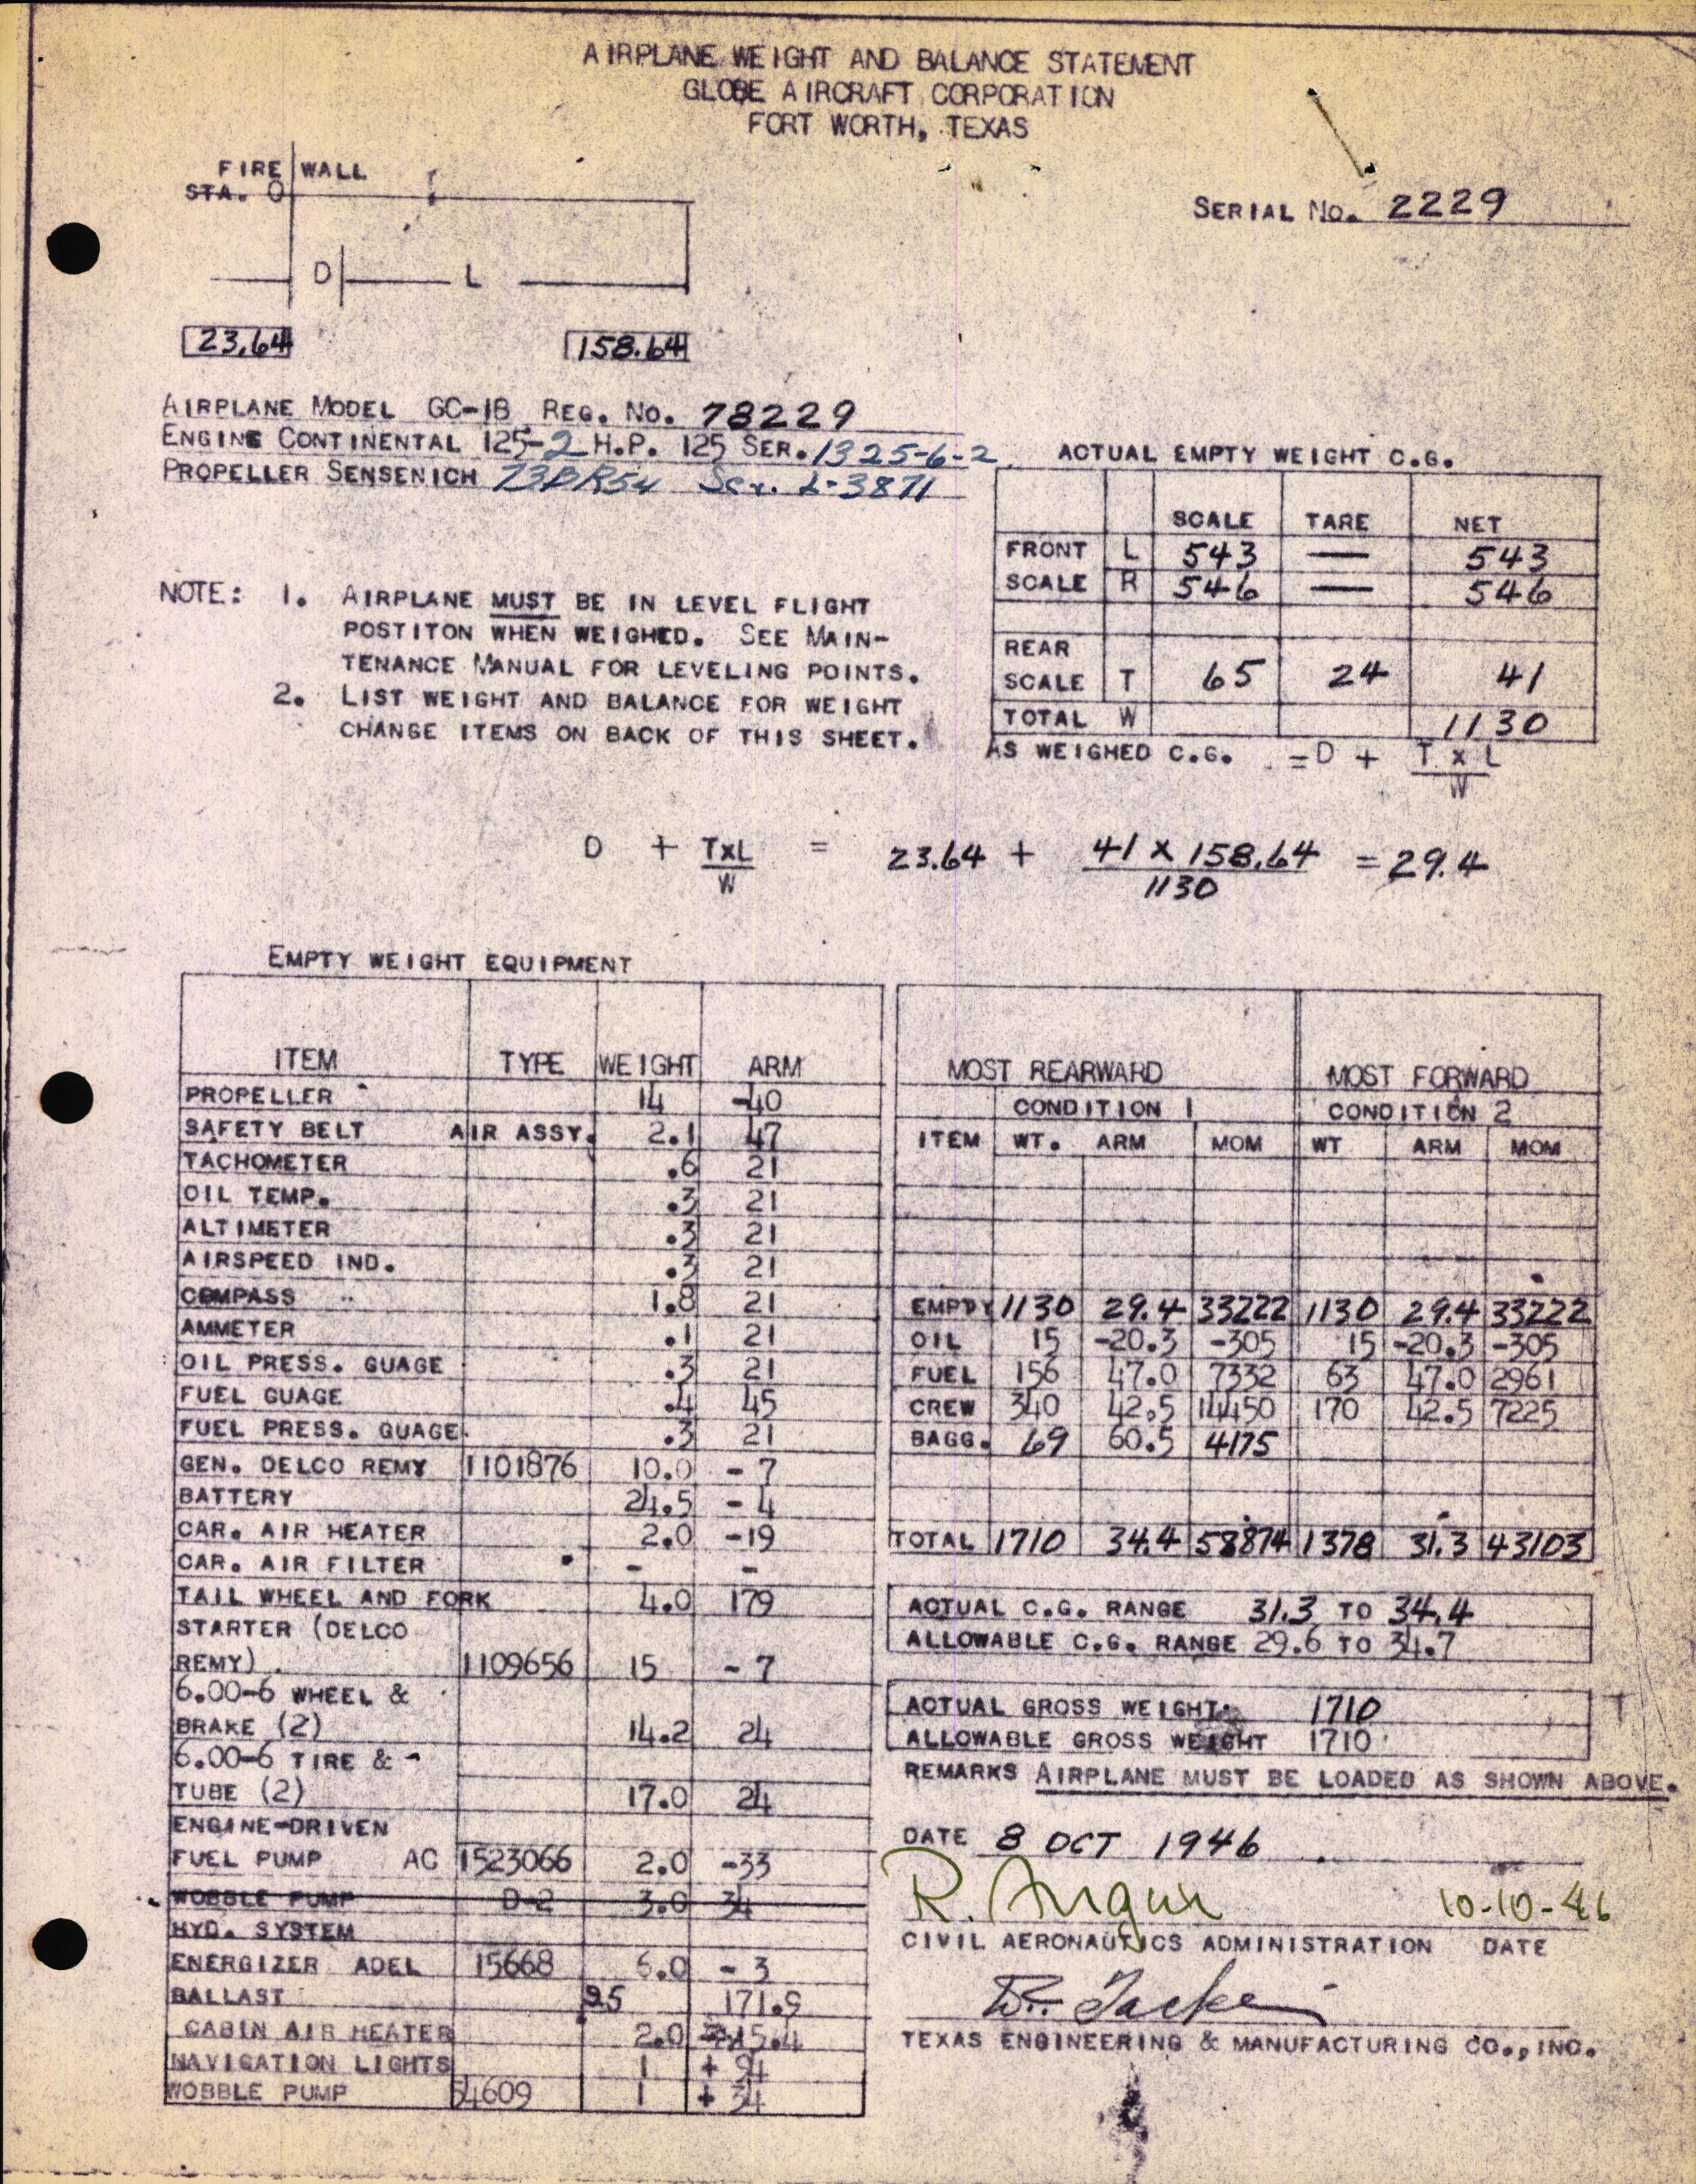 Sample page 1 from AirCorps Library document: Technical Information for Serial Number 2229